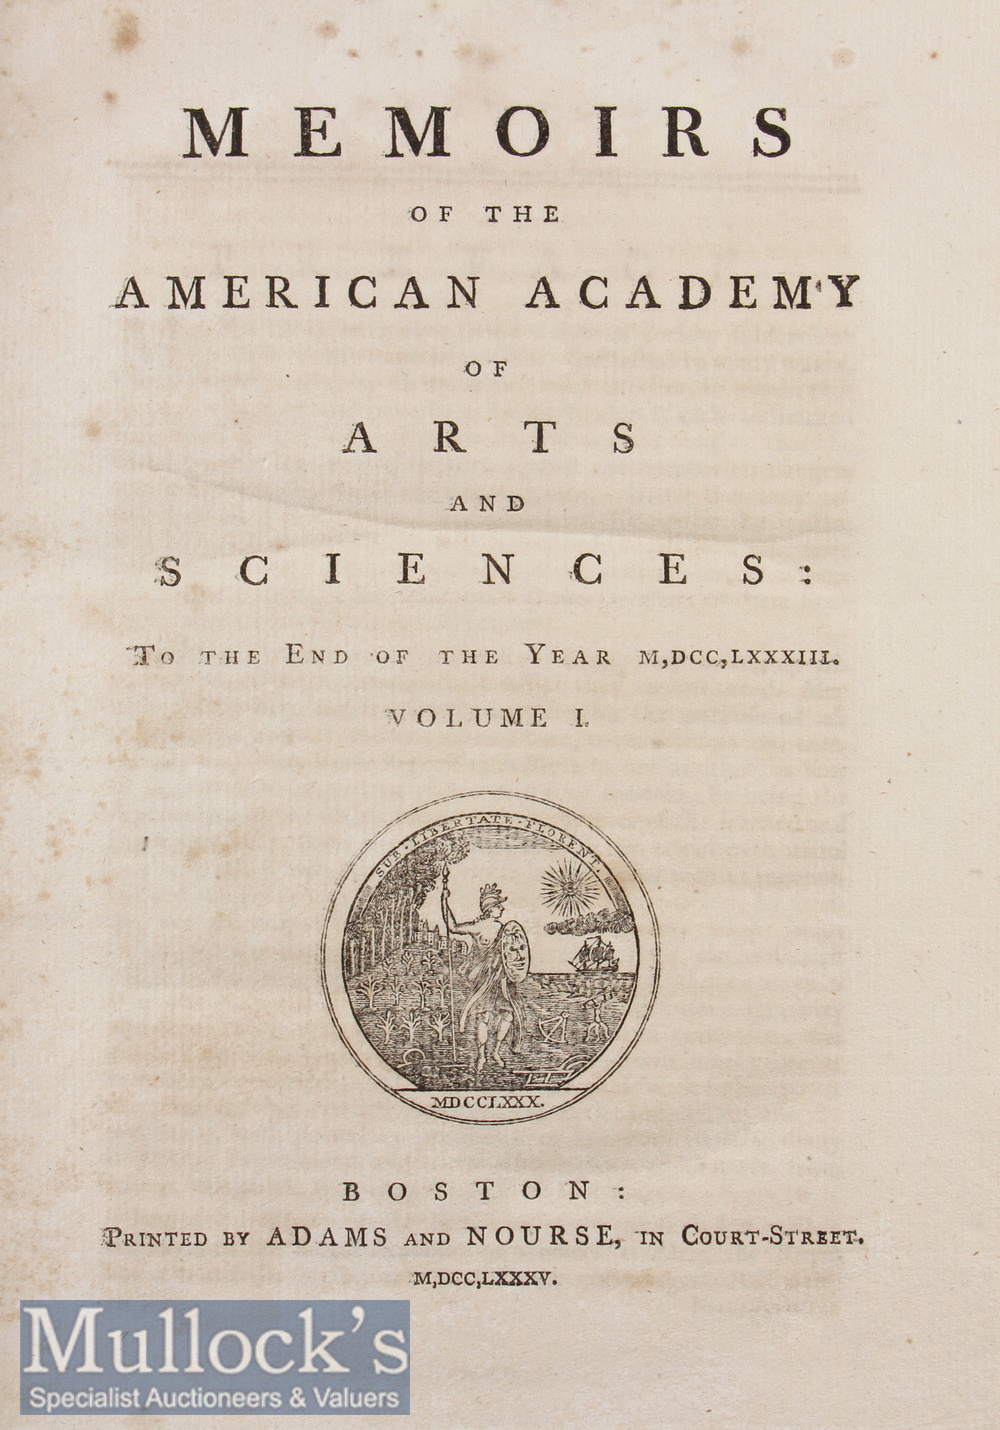 Americana – Memoirs of the American Academy of Arts and Sciences Vol I 1785 the first volume of this - Image 2 of 2